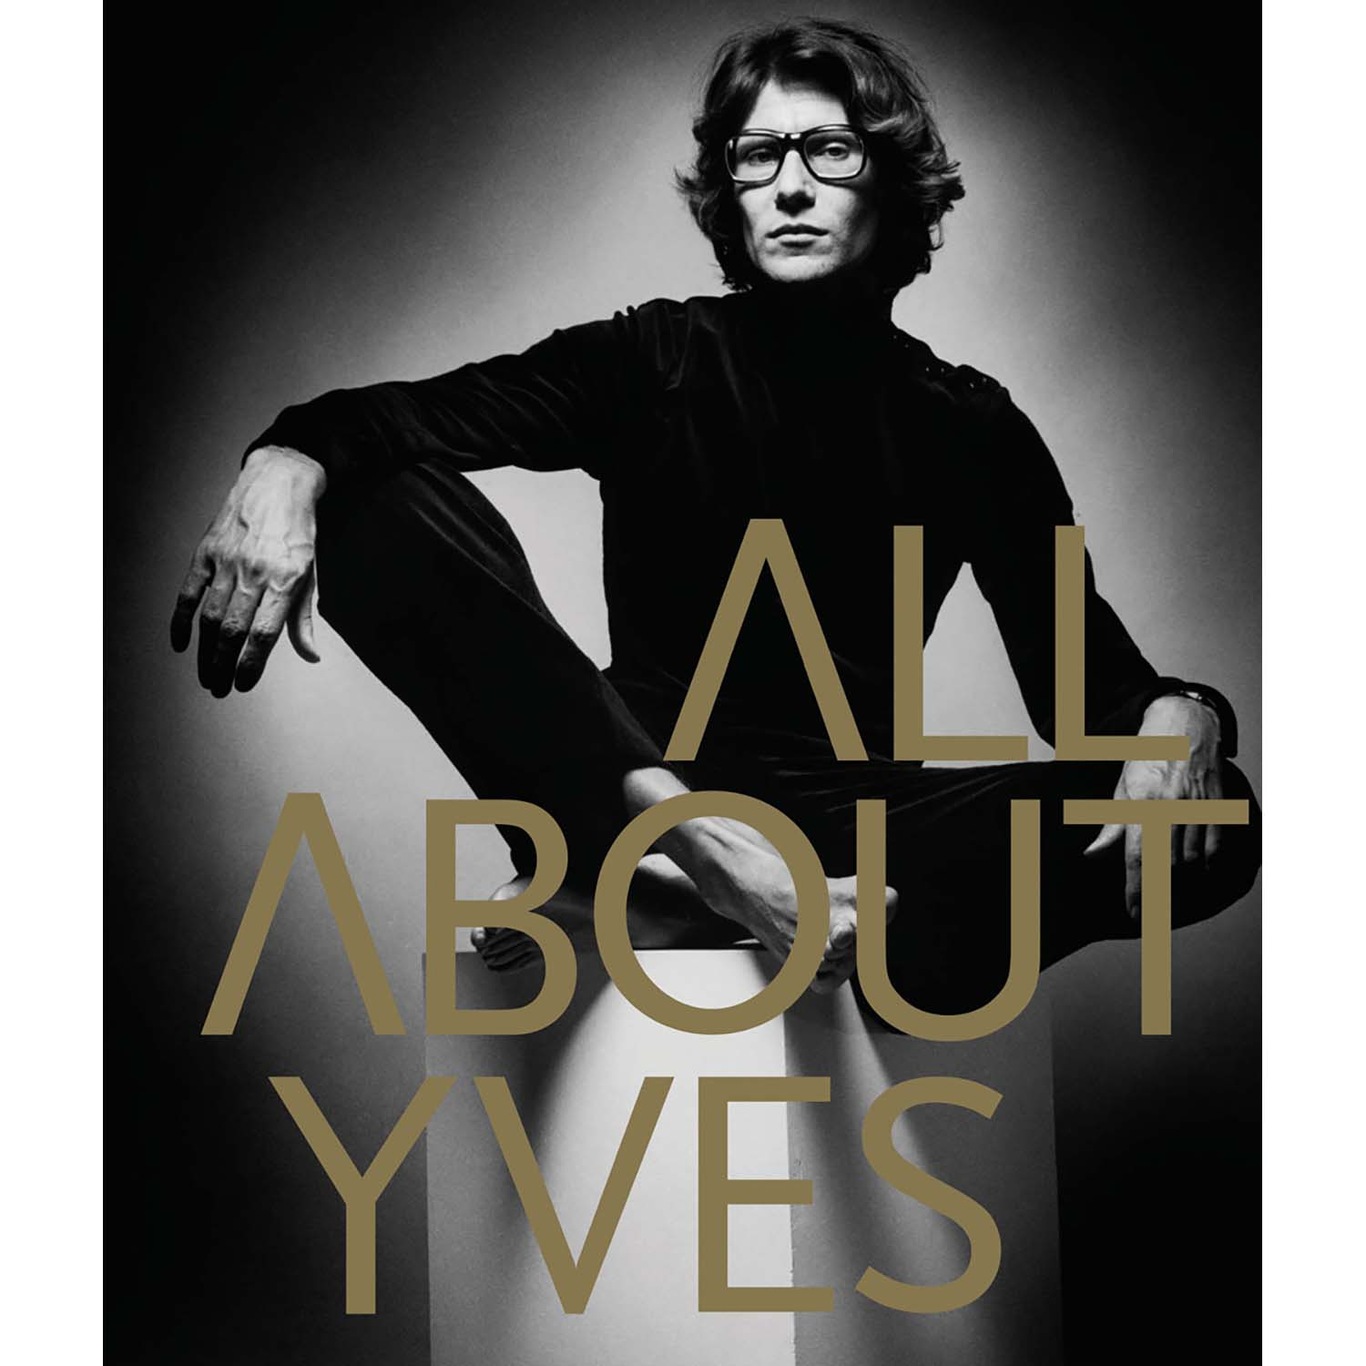 All About Yves Kirja